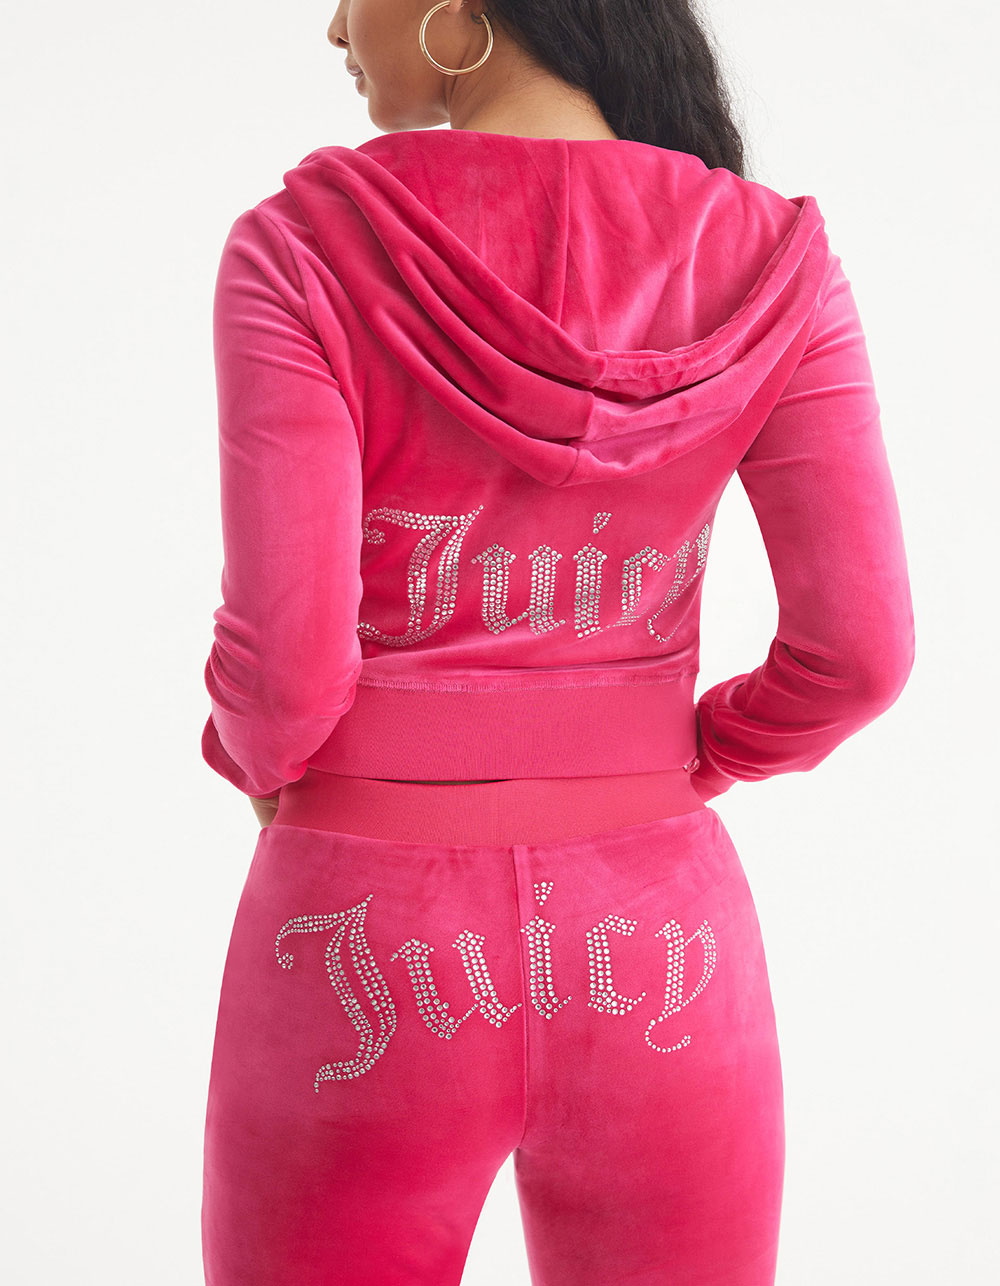 Juicy Couture Apparel